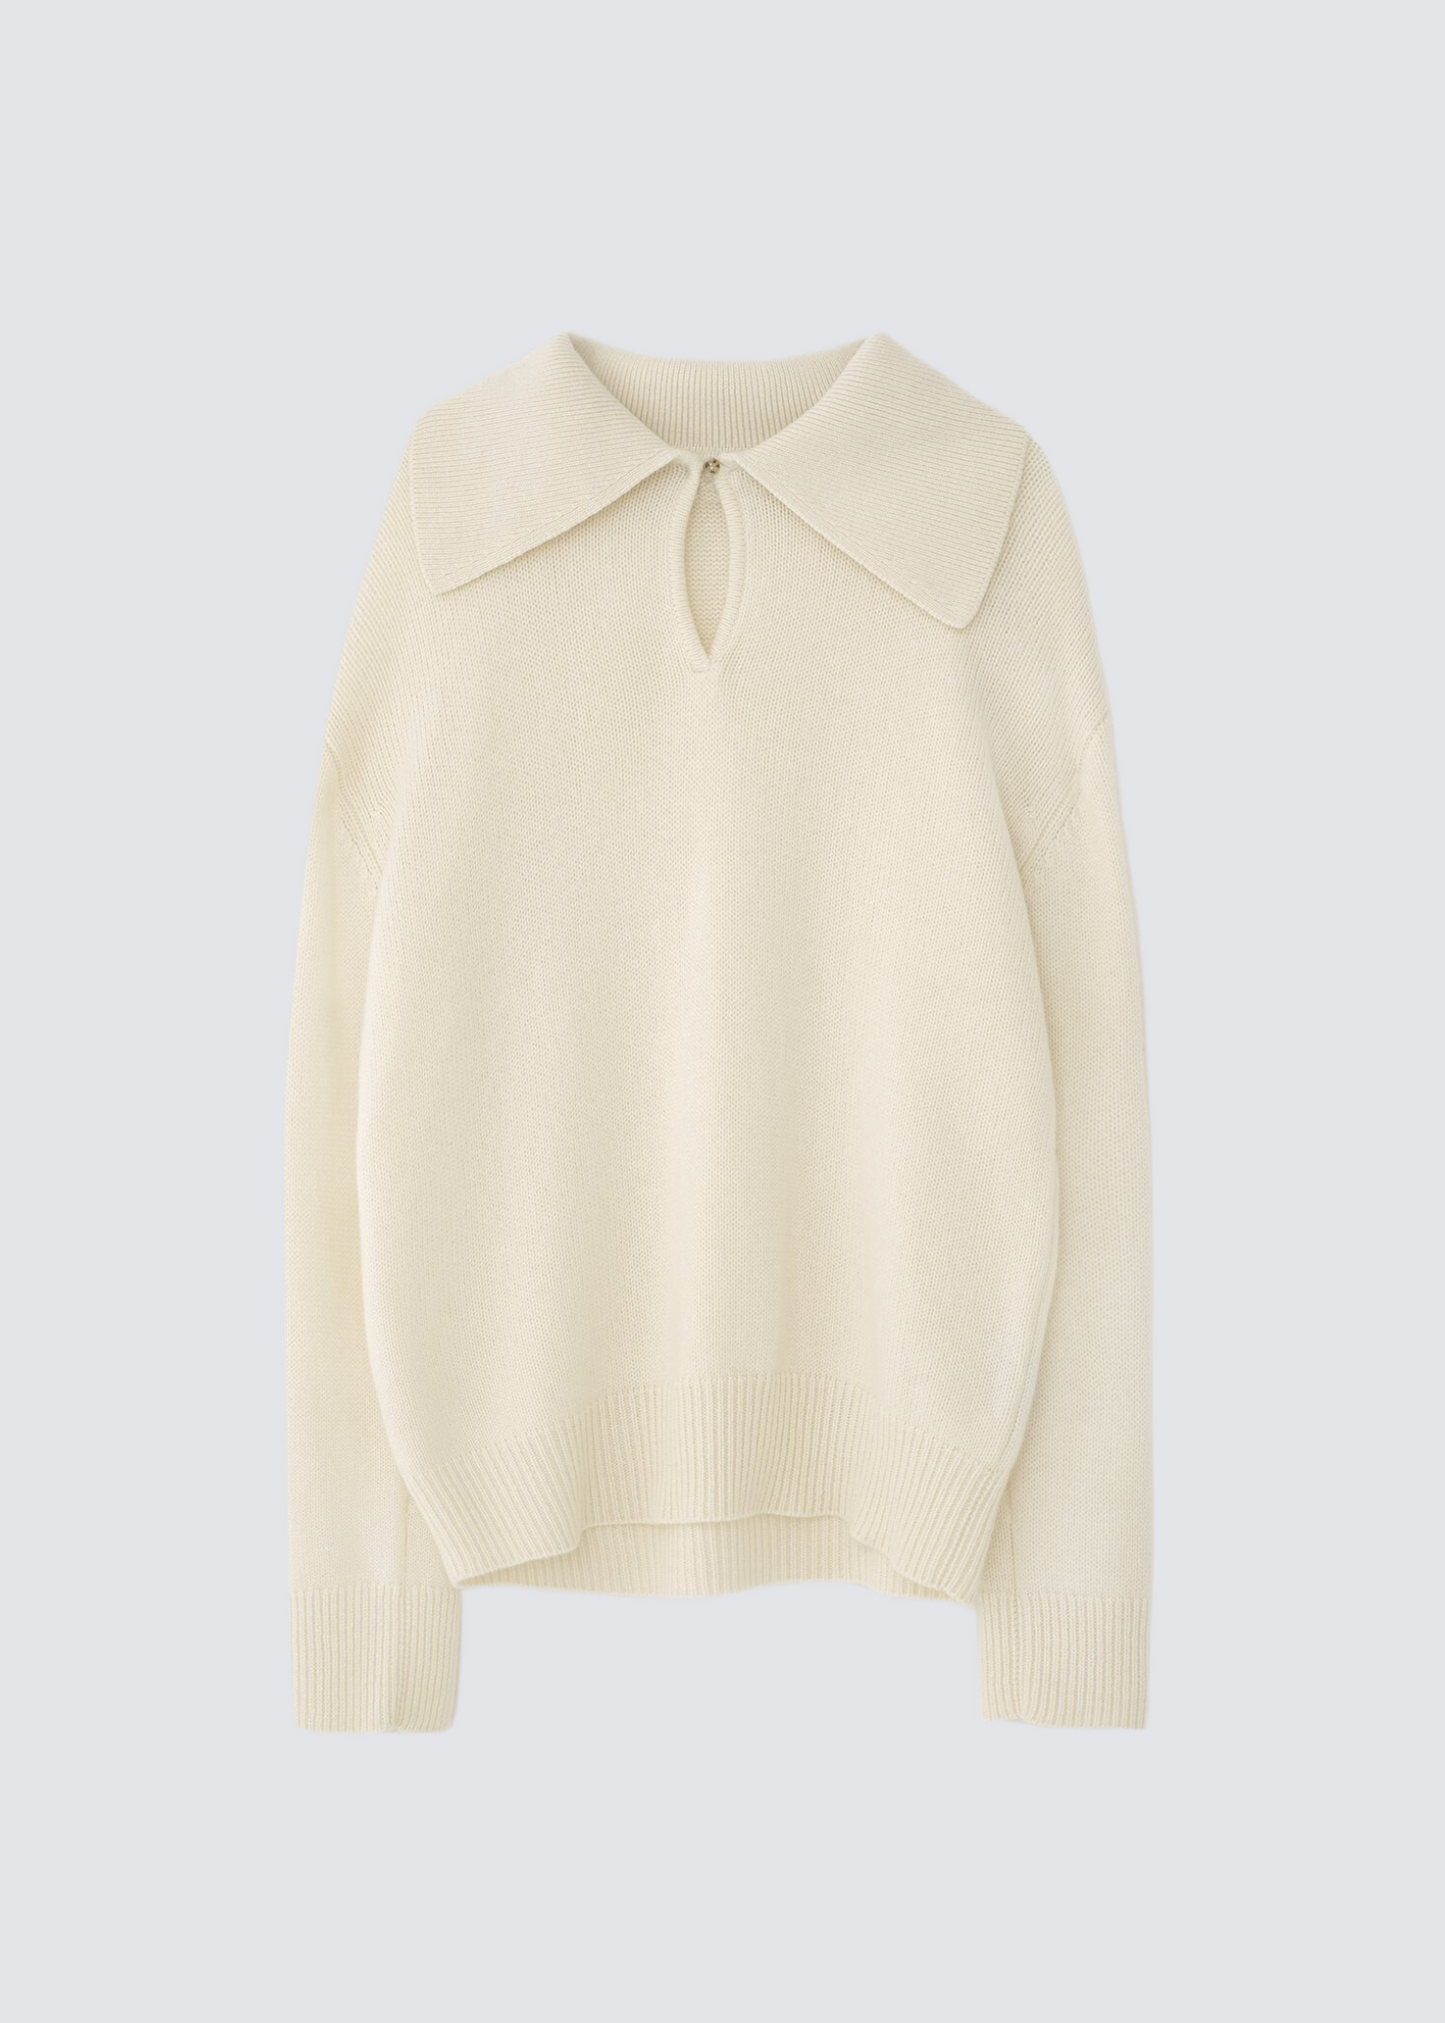 The Dorothy Sweater, Cream, Pullover